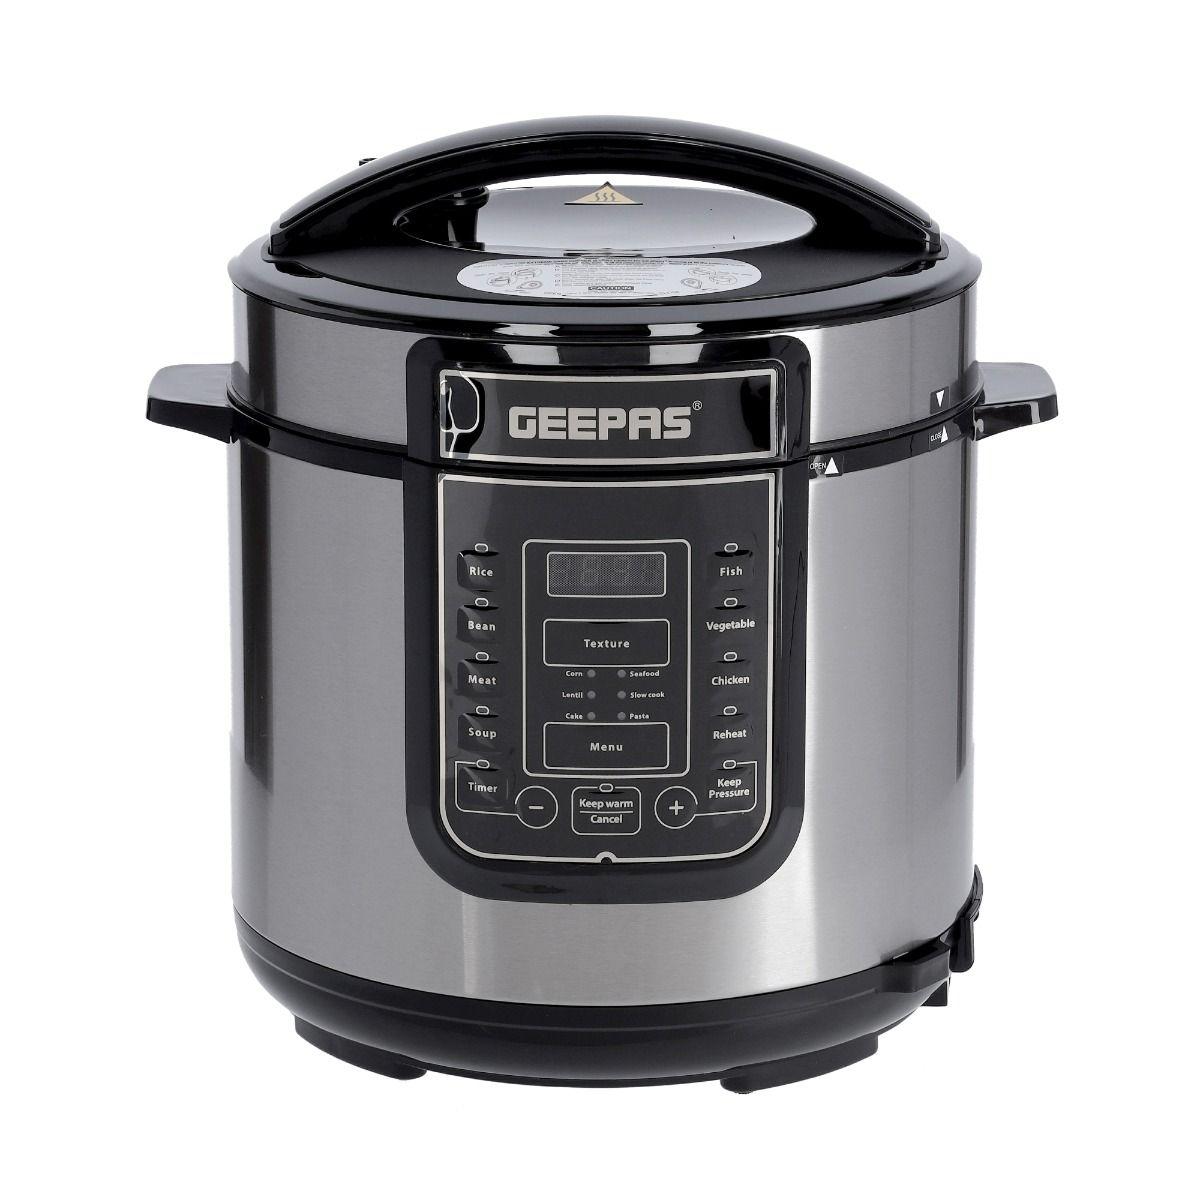 GMC5326N/Geepas Digital Multi Cooker, 4 digital LED display, Large control panel, one-touch button c 1000 WATTS / 6 L